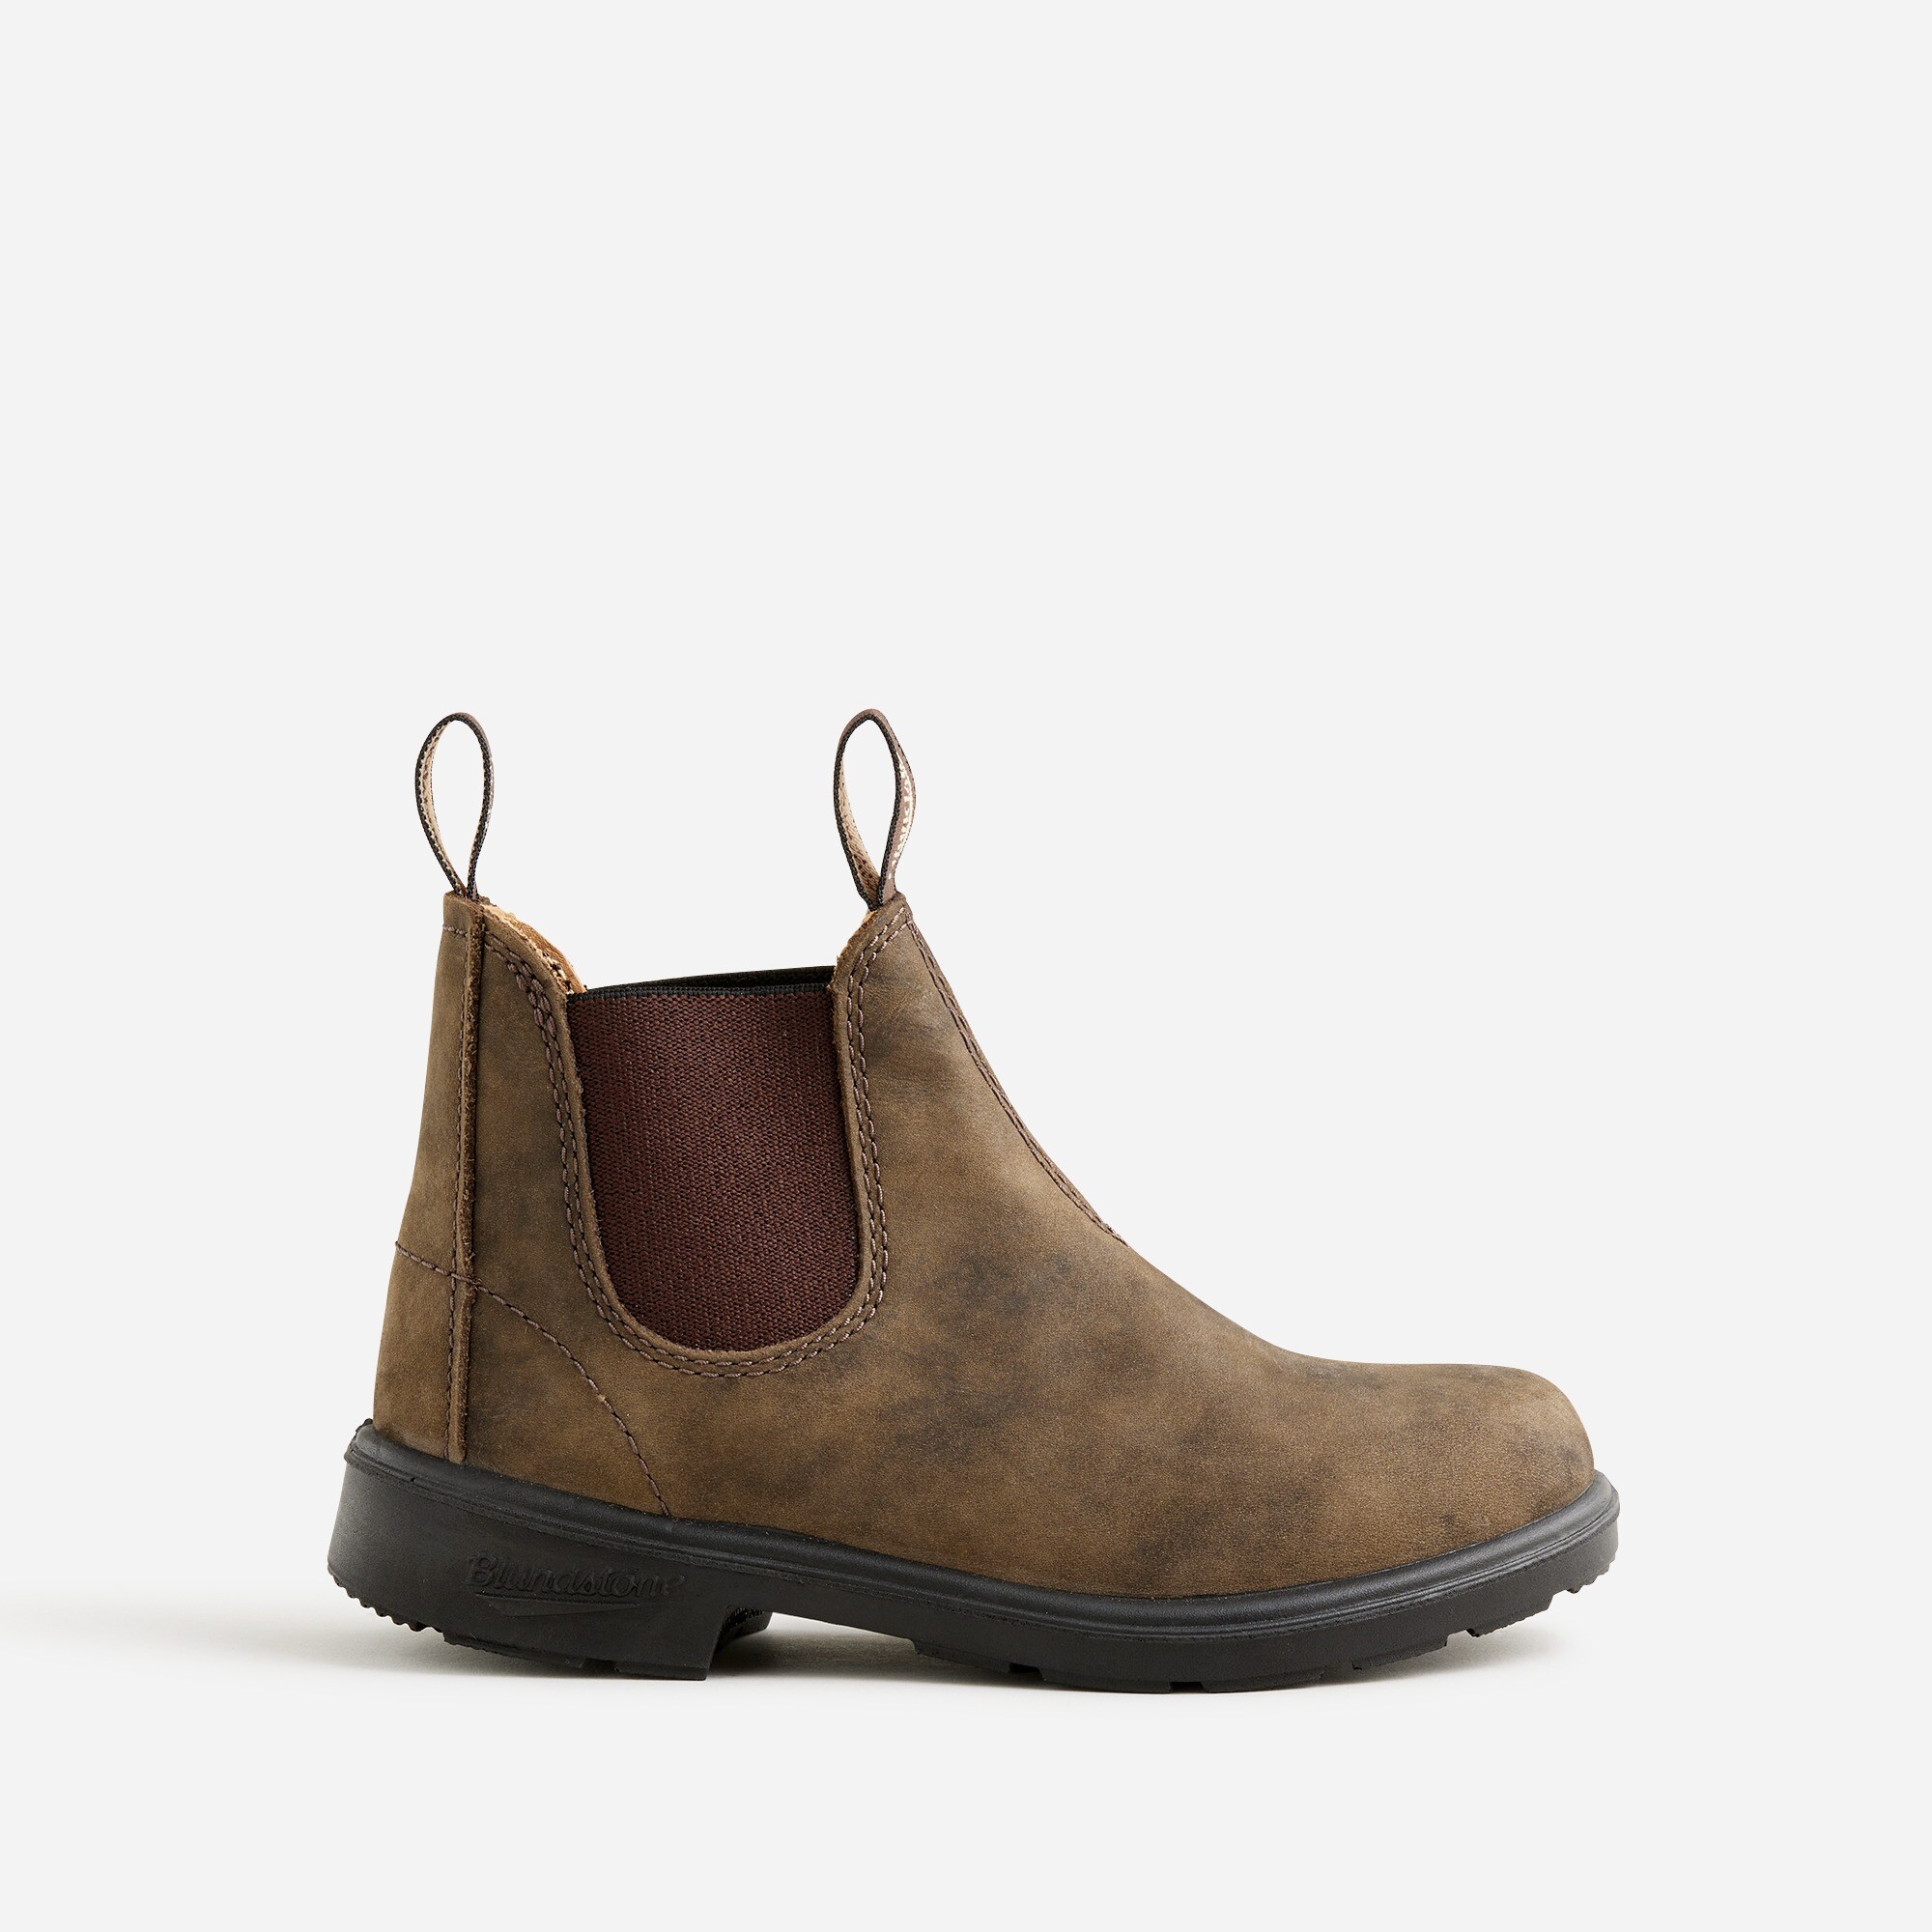  Kids' Blundstone&reg; boots in oiled leather